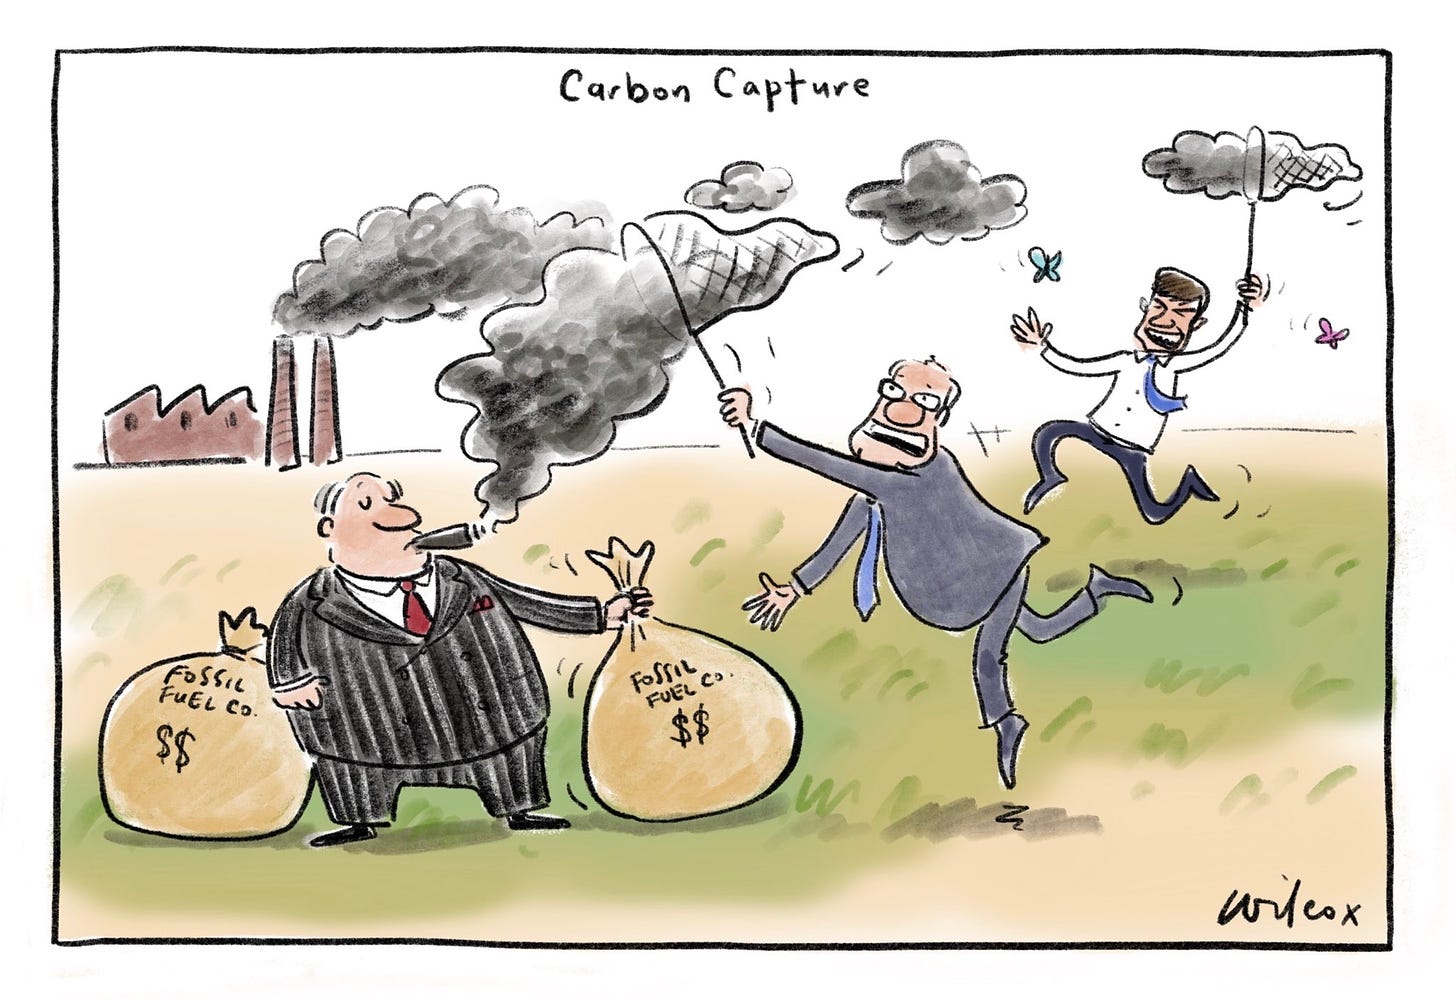 Cartoon of fossil fuel executive holding bags of profit while politicians try to capture emissions with nets